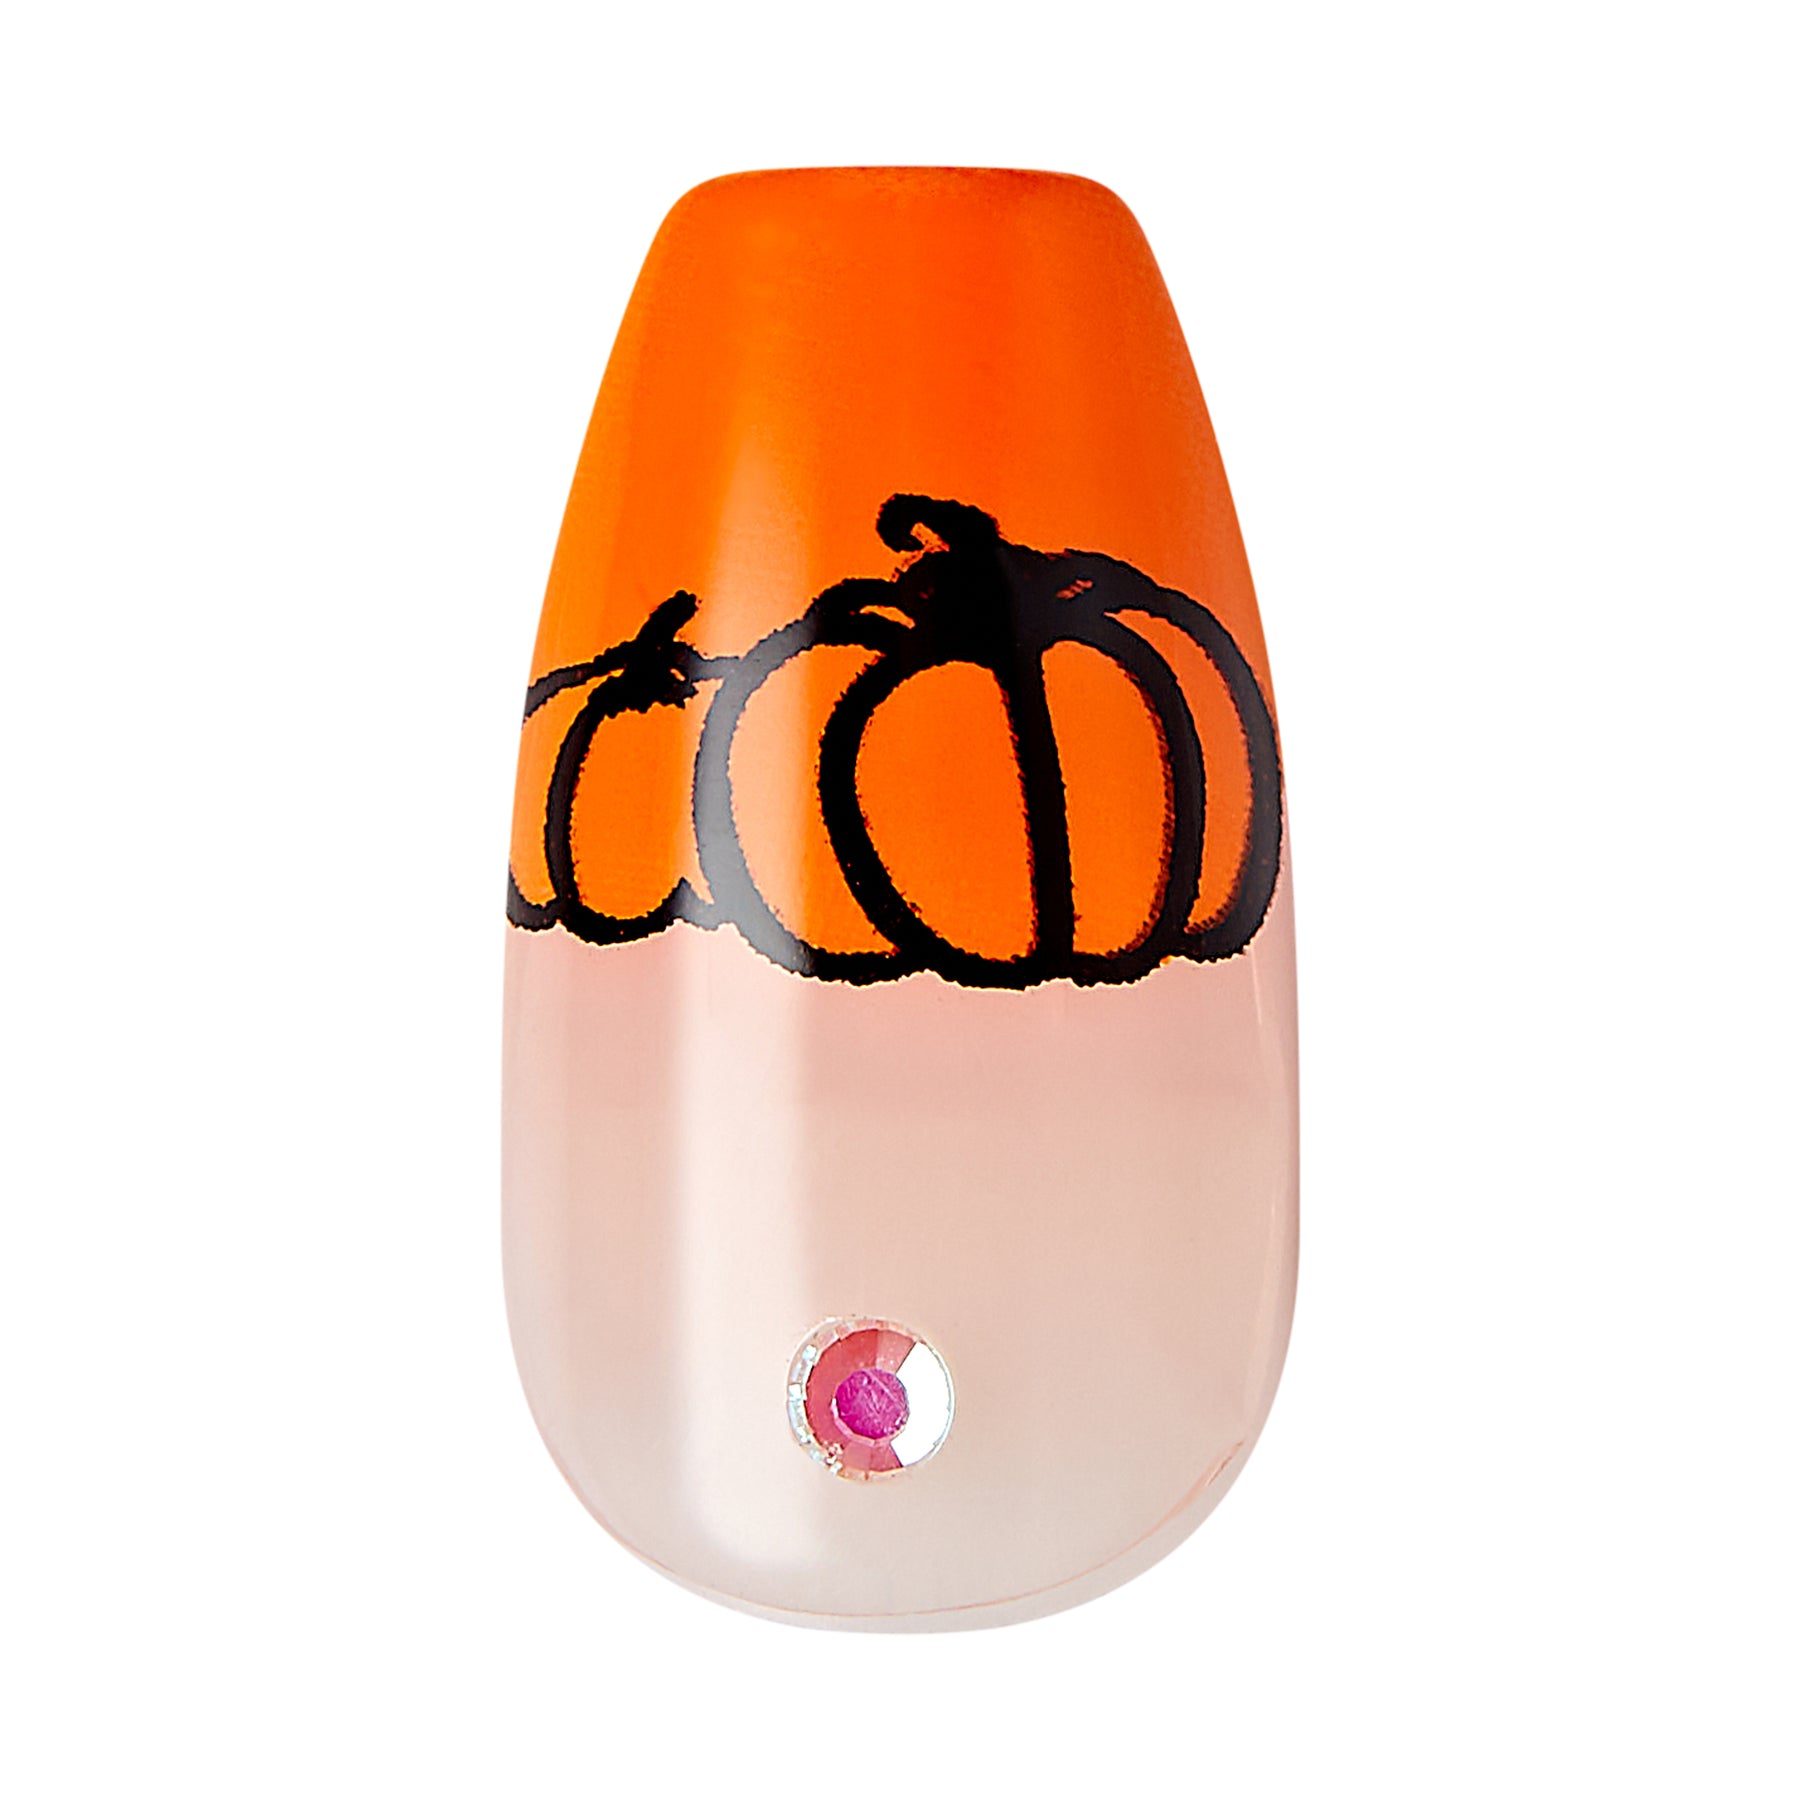 CREEPY CRAWLY IMPRESS GLOW IN THE DARK HALLOWEEN - OUTLET KISS